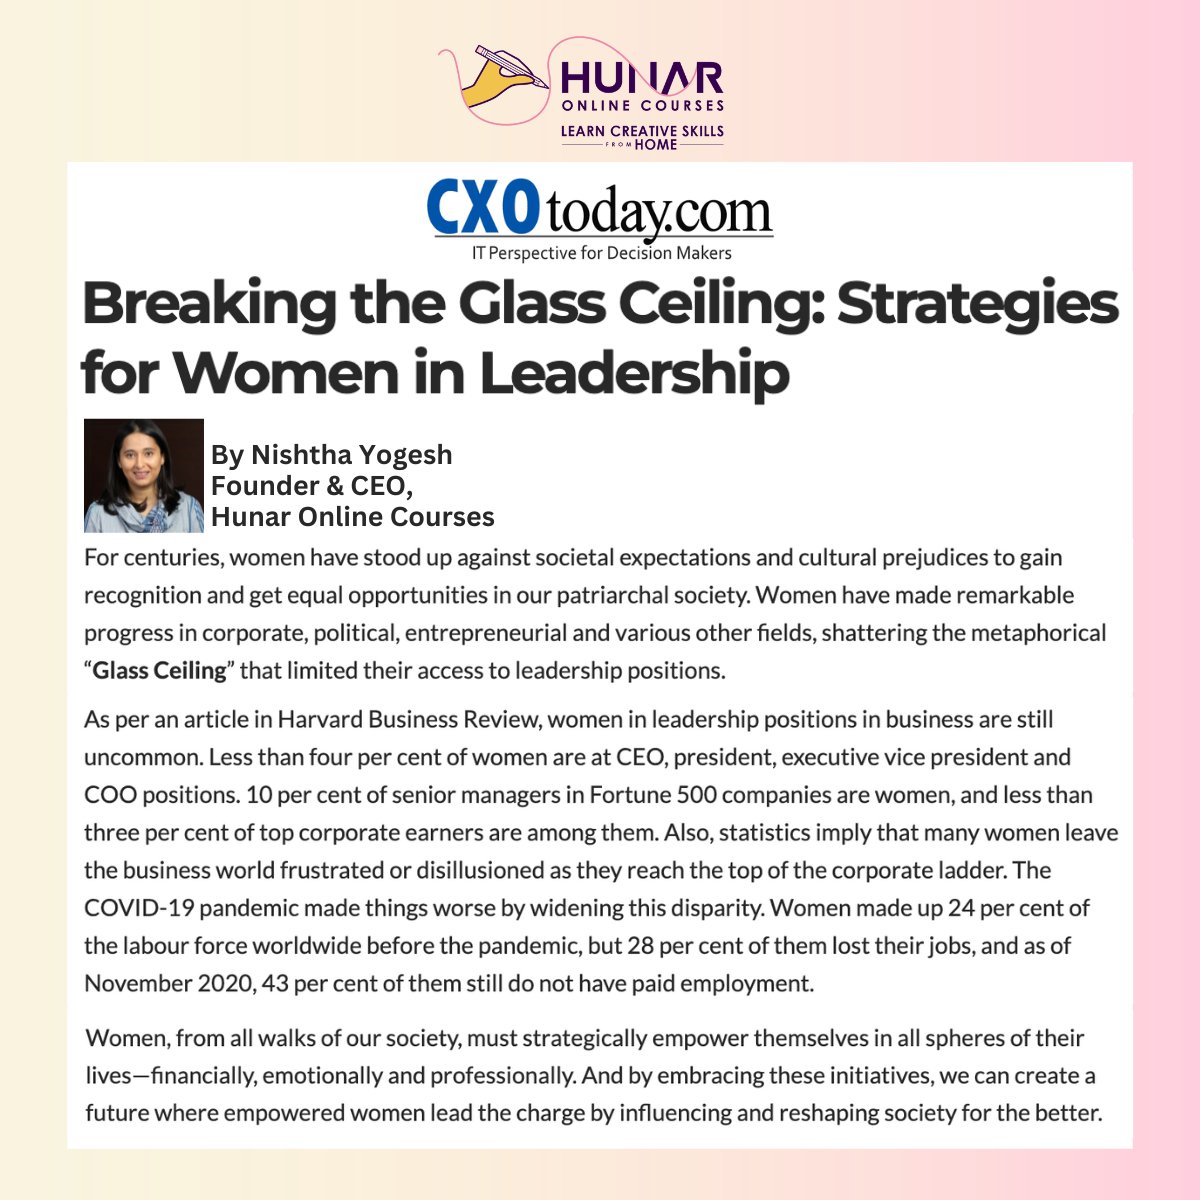 Our CEO, @NishthaYogesh shares her perspective on Women Entrepreneurship and how we can help shatter the glass ceiling to create countless opportunities for women.

Read her special feature on @CXOToday - cxotoday.com/story/breaking…

#hunaronlinecourses #hunarsepehchaan #inspiration